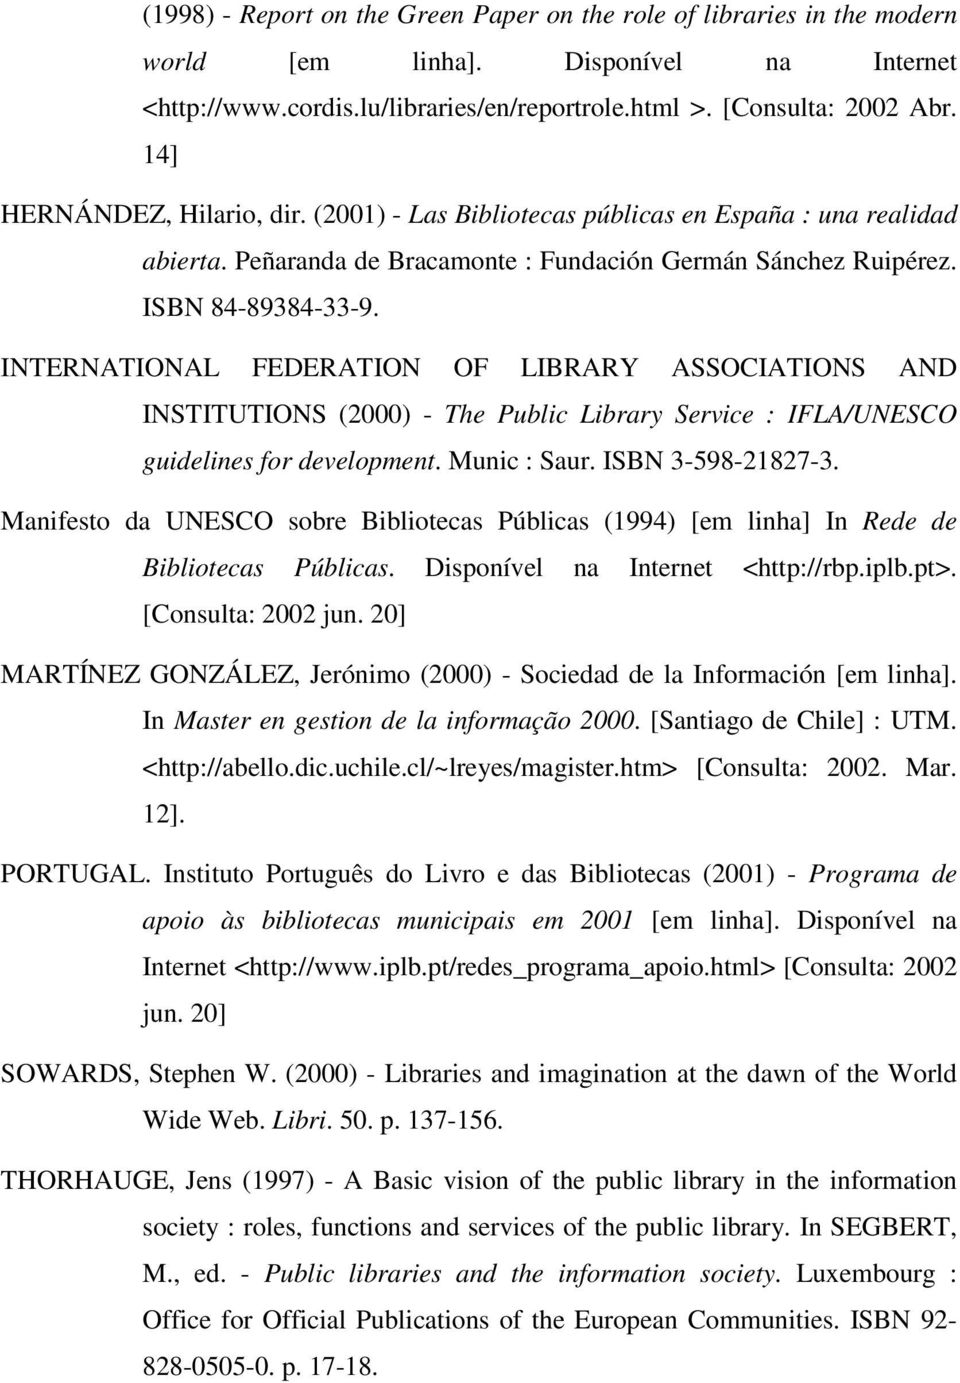 INTERNATIONAL FEDERATION OF LIBRARY ASSOCIATIONS AND INSTITUTIONS (2000) - The Public Library Service : IFLA/UNESCO guidelines for development. Munic : Saur. ISBN 3-598-21827-3.